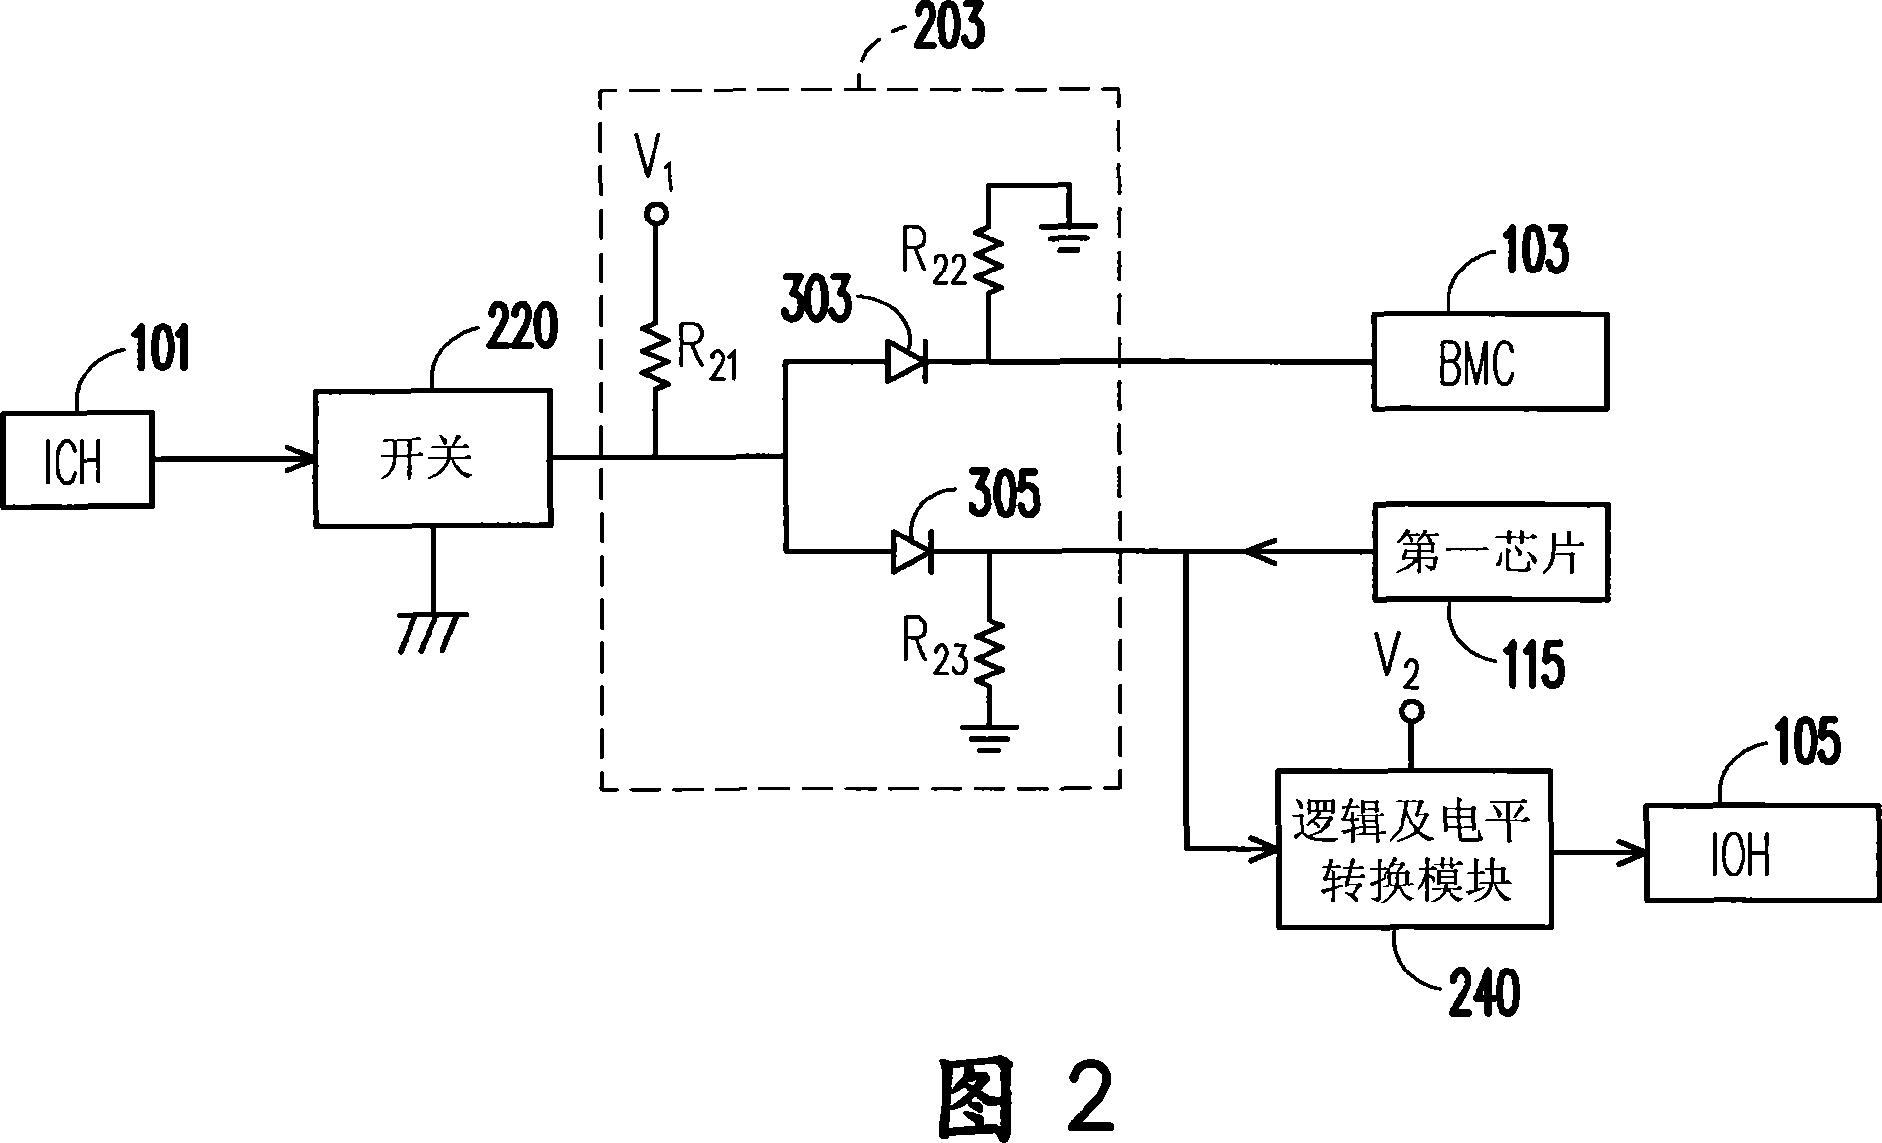 Conversion and transmission circuit for non-shielding interrupt request